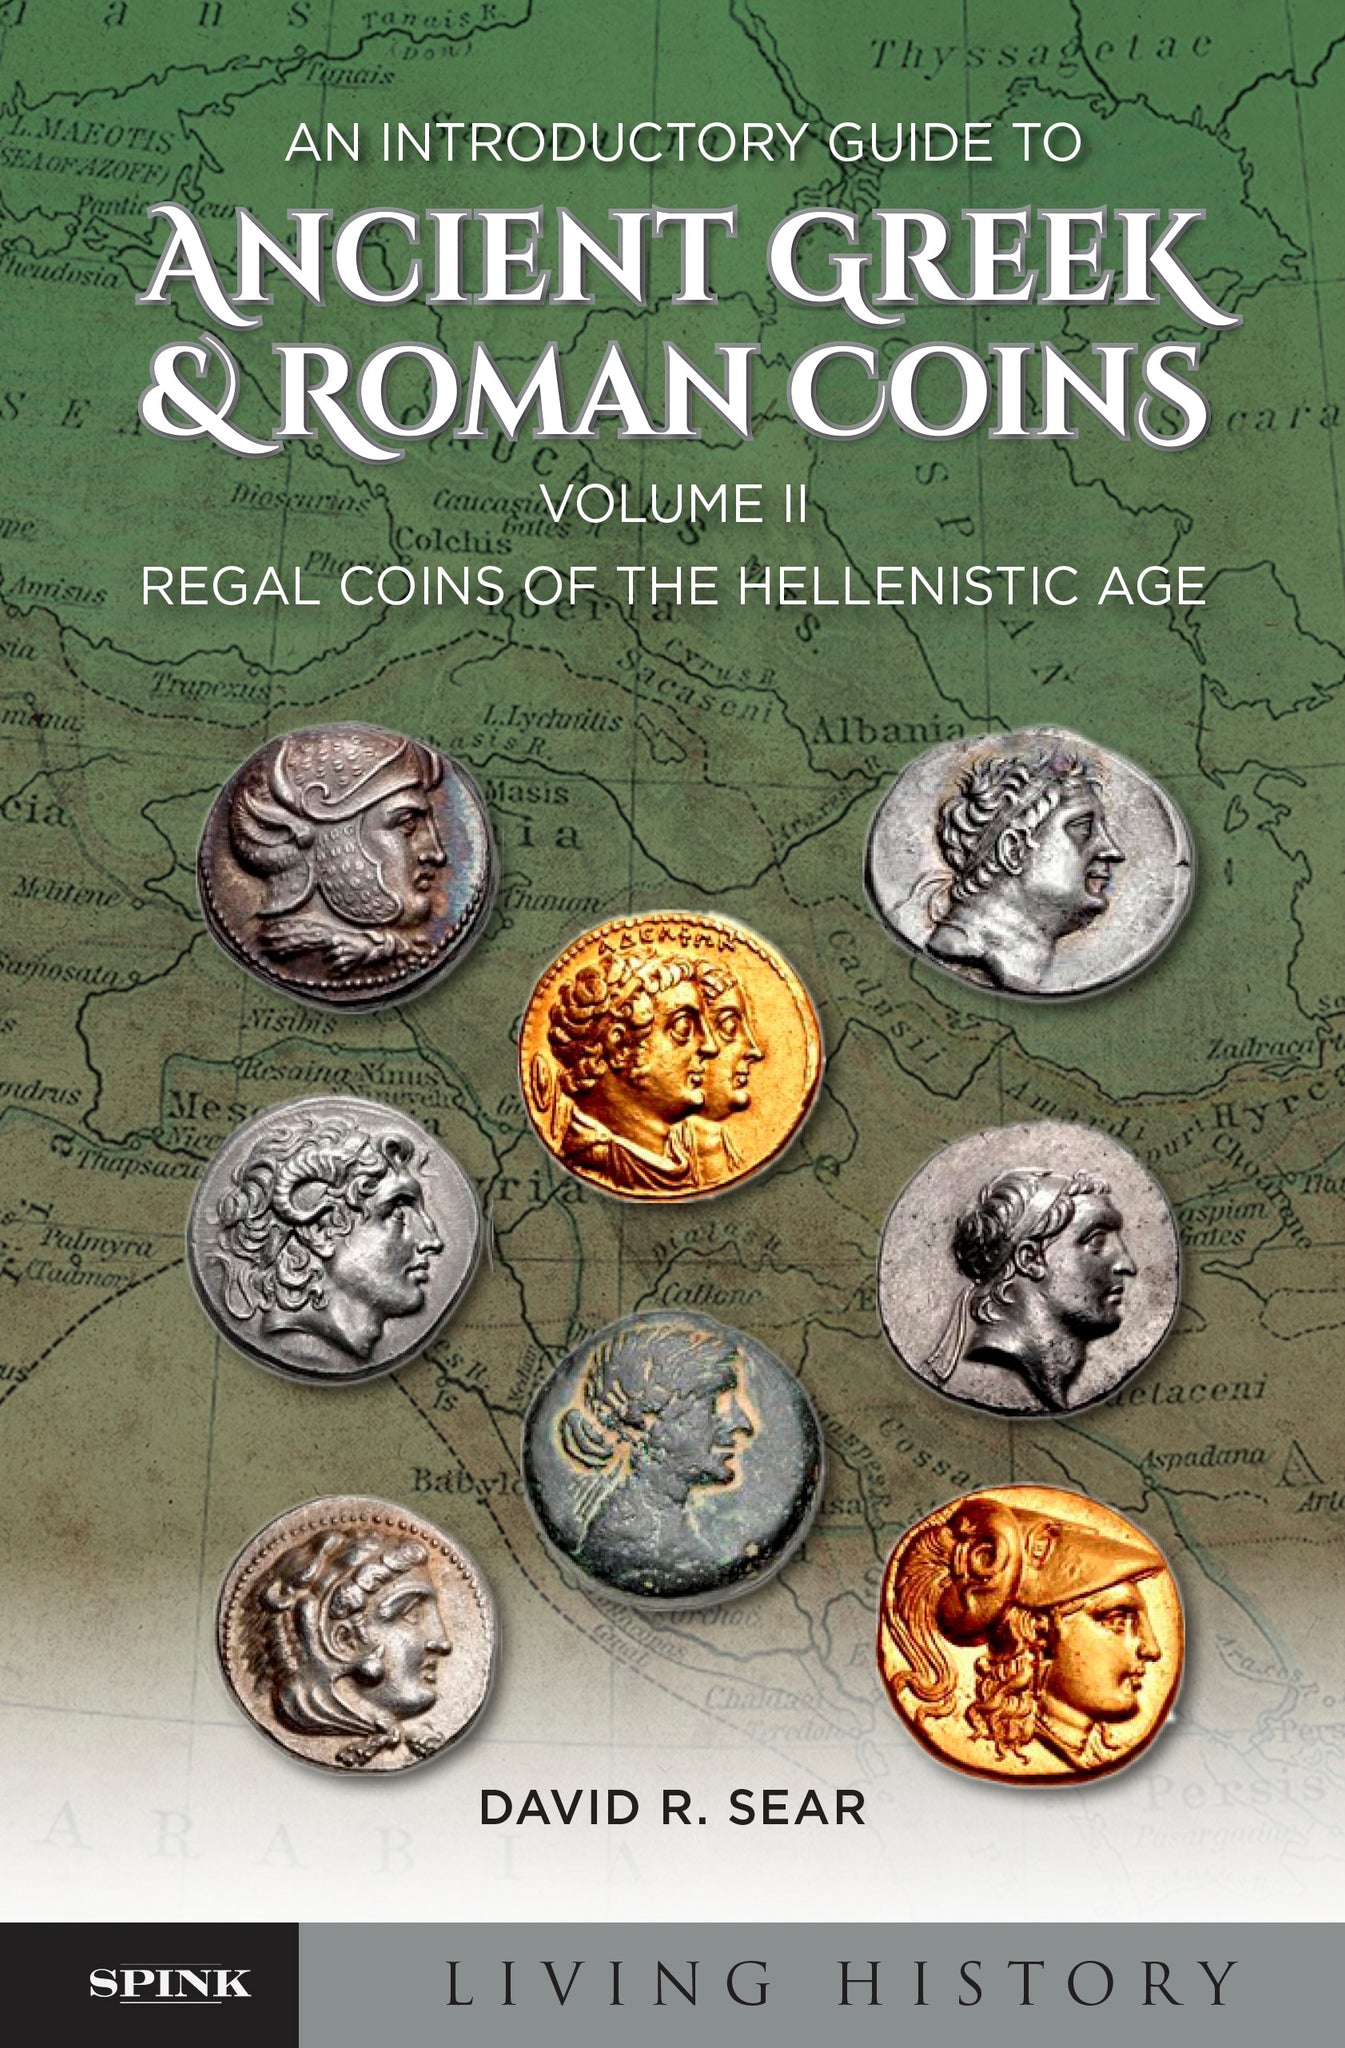 An Introductory Guide to Ancient Greek and Roman Coins Volume II: Regal Coins of the Hellenistic Age by David Sear